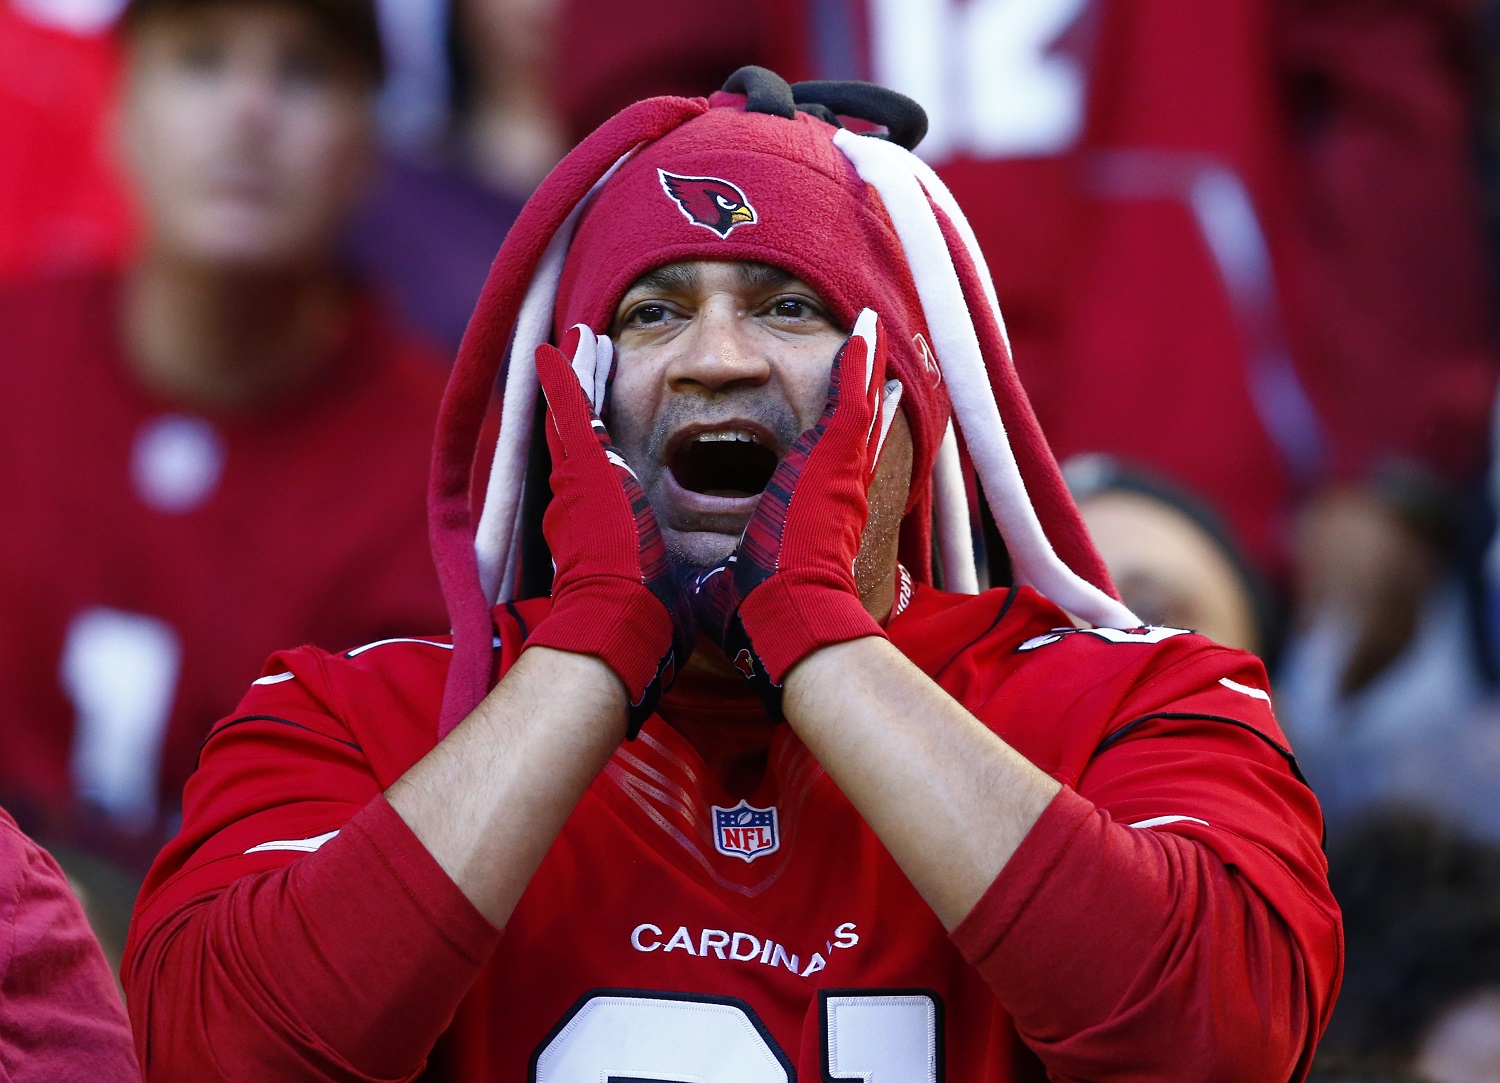 An Arizona Cardinals fan cheers during the first half of an NFL football game against the New Orleans Saints, Sunday, Dec. 18, 2016, in Glendale, Ariz. (AP Photo/Ross D. Franklin)